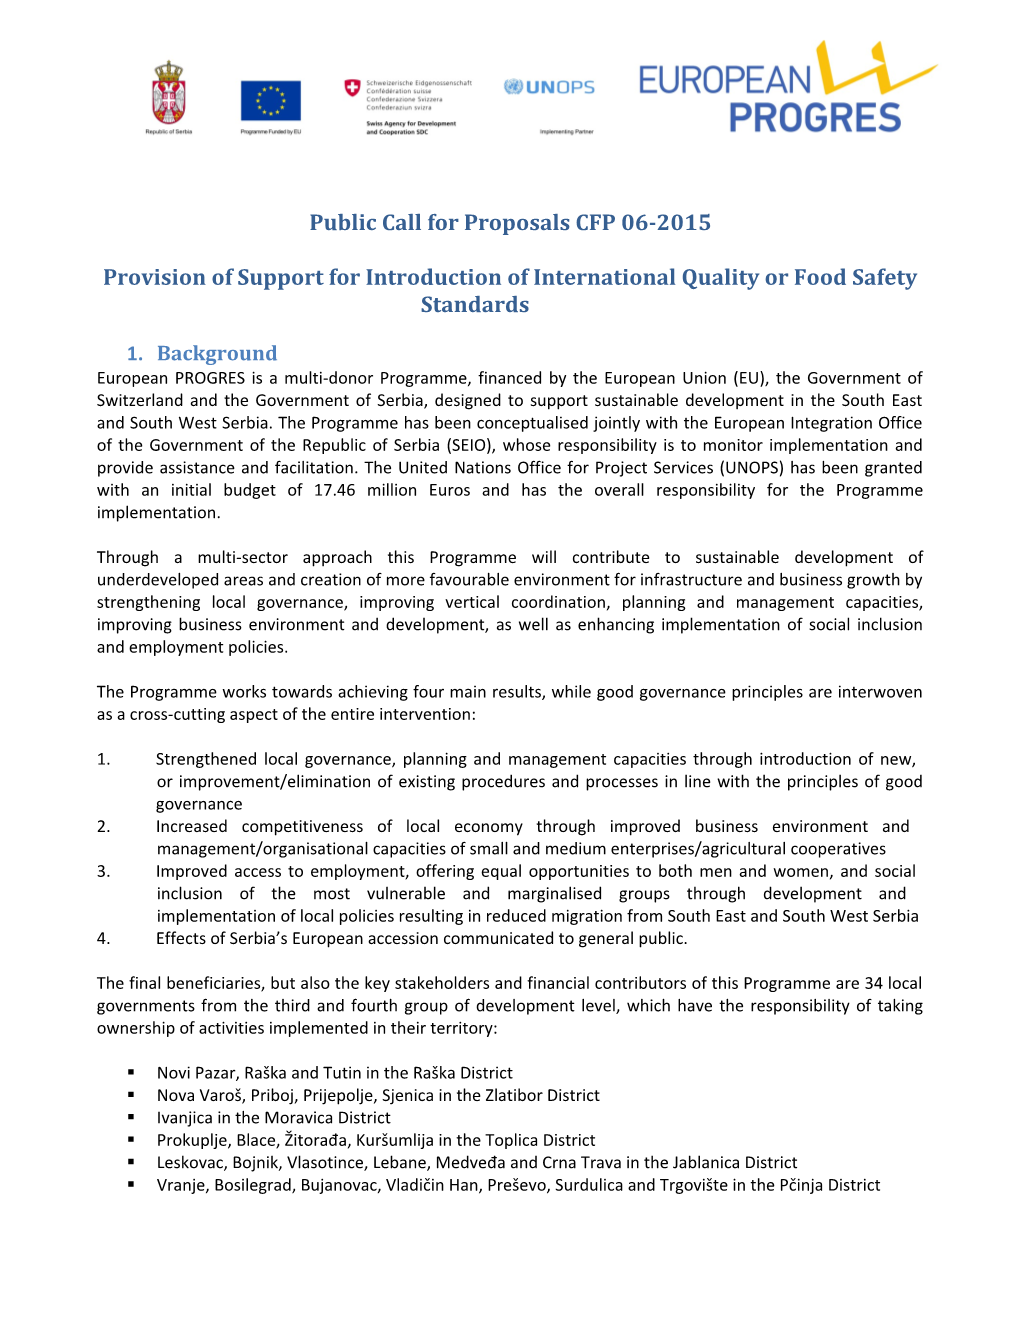 Provision of Support for Introduction of International Quality Or Food Safety Standards Page 1